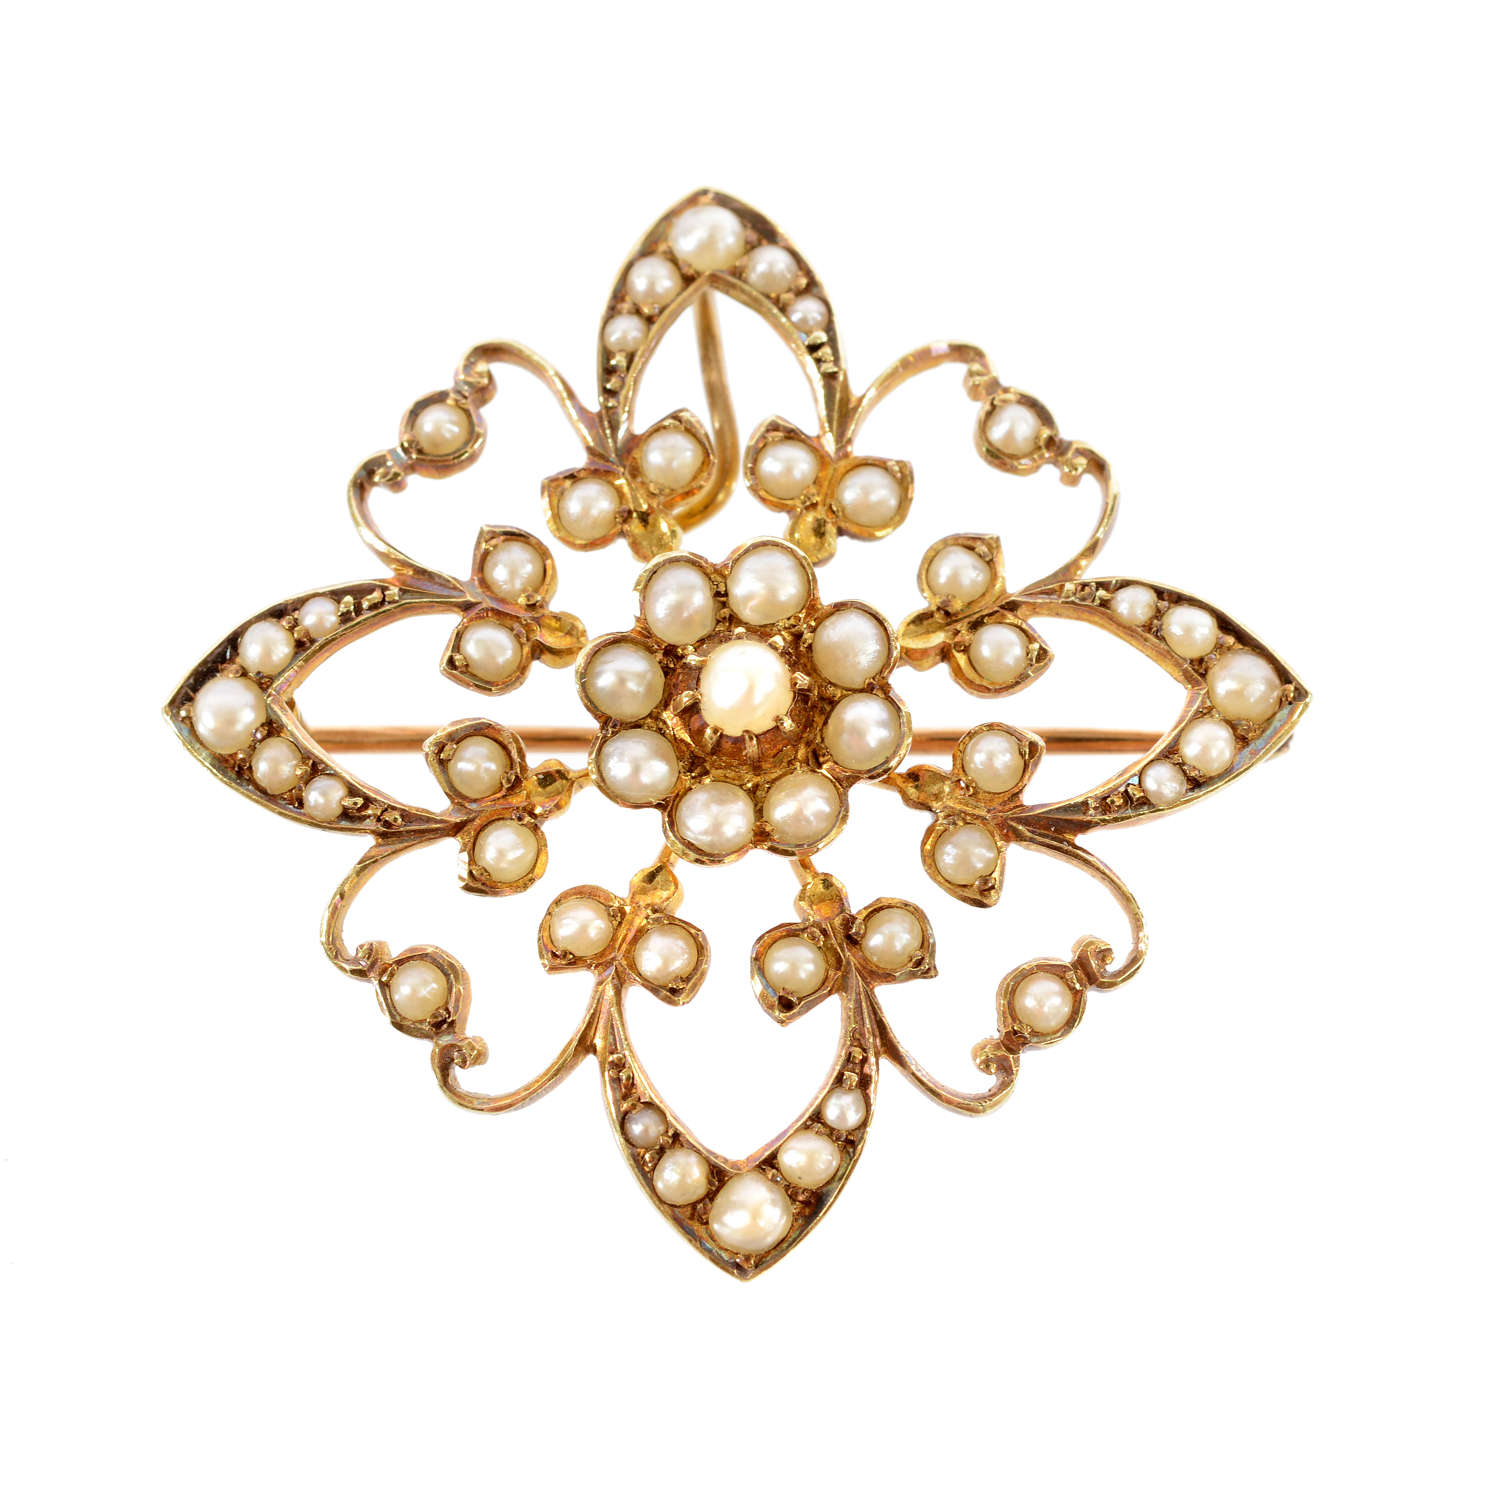 An Edwardian 15ct Gold and Seed-Pearl Pendant/Brooch